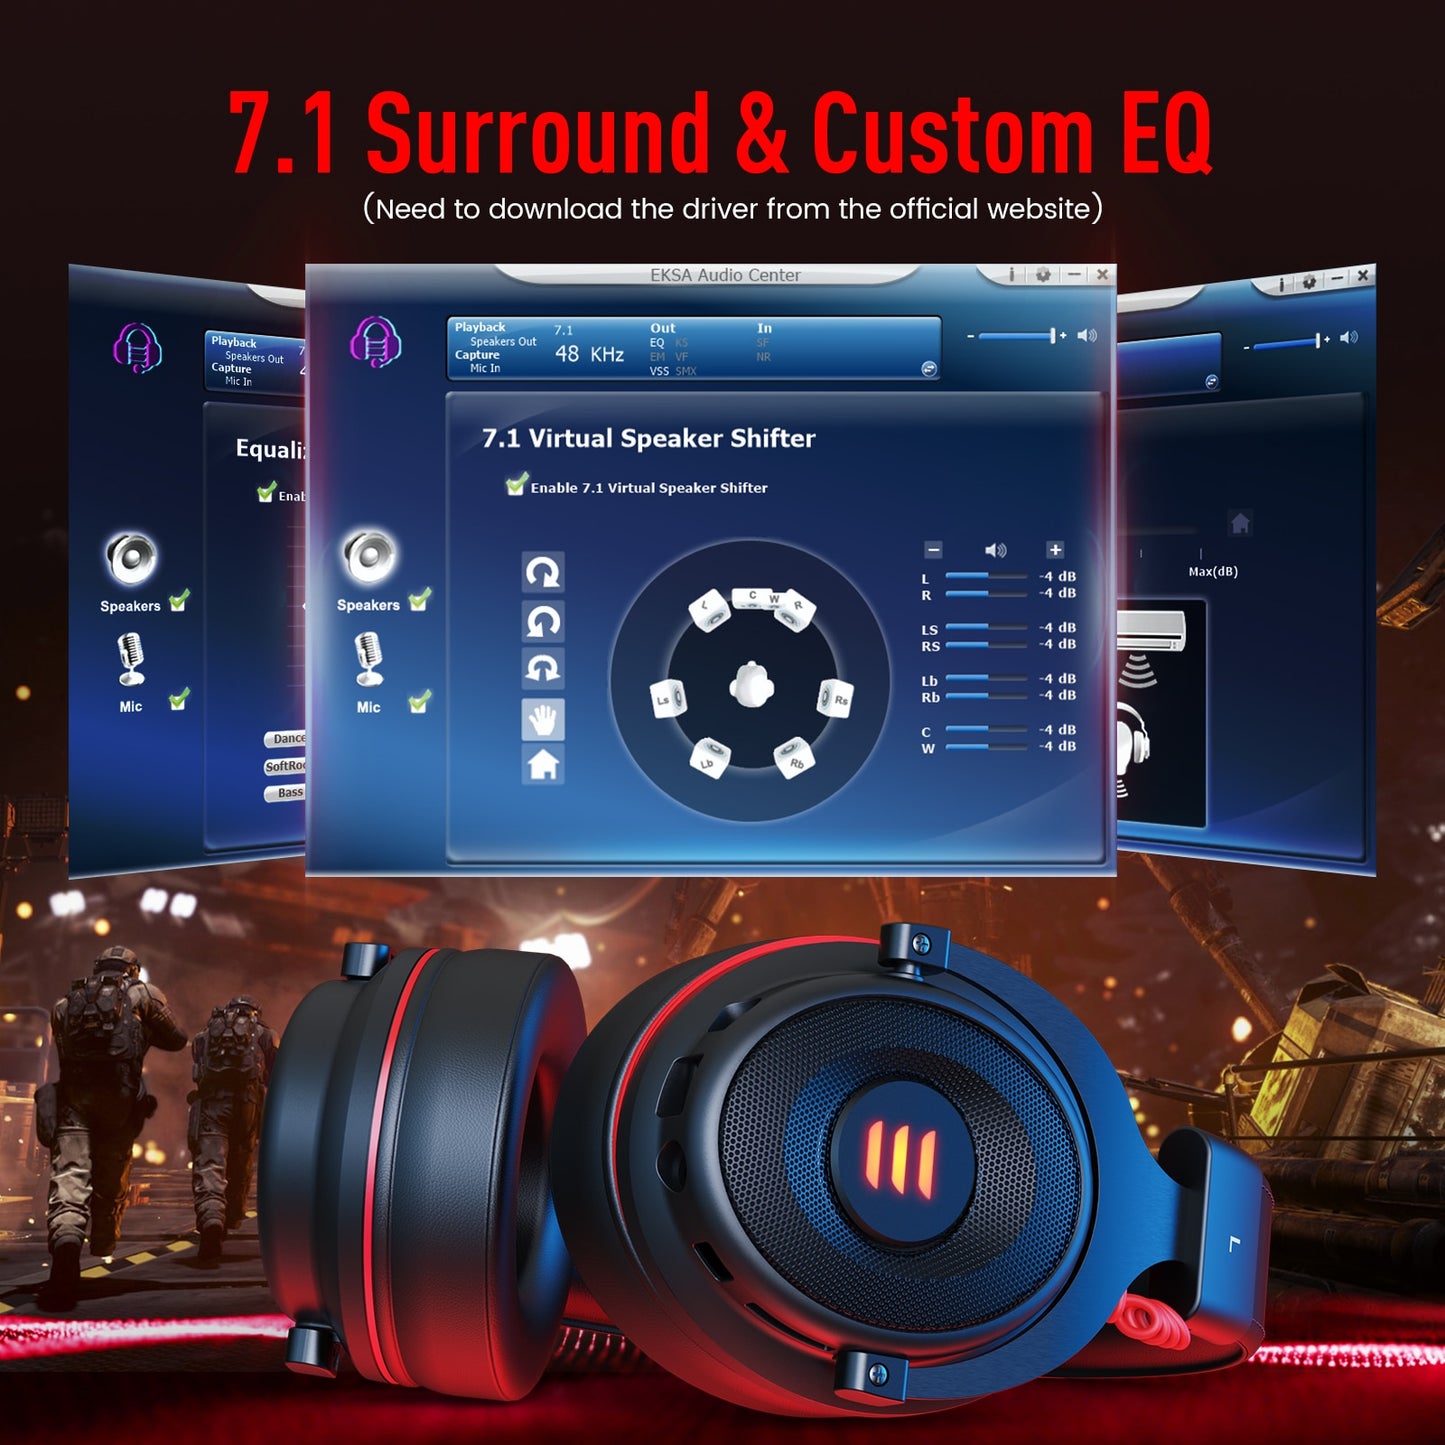 EKSA Gaming Headset Gamer 7.1 Surround &amp; 3D stereo USB/Type C/3.5mm Wired Gaming Headphones with Microphone For PC/PS4/PS5/Xbox